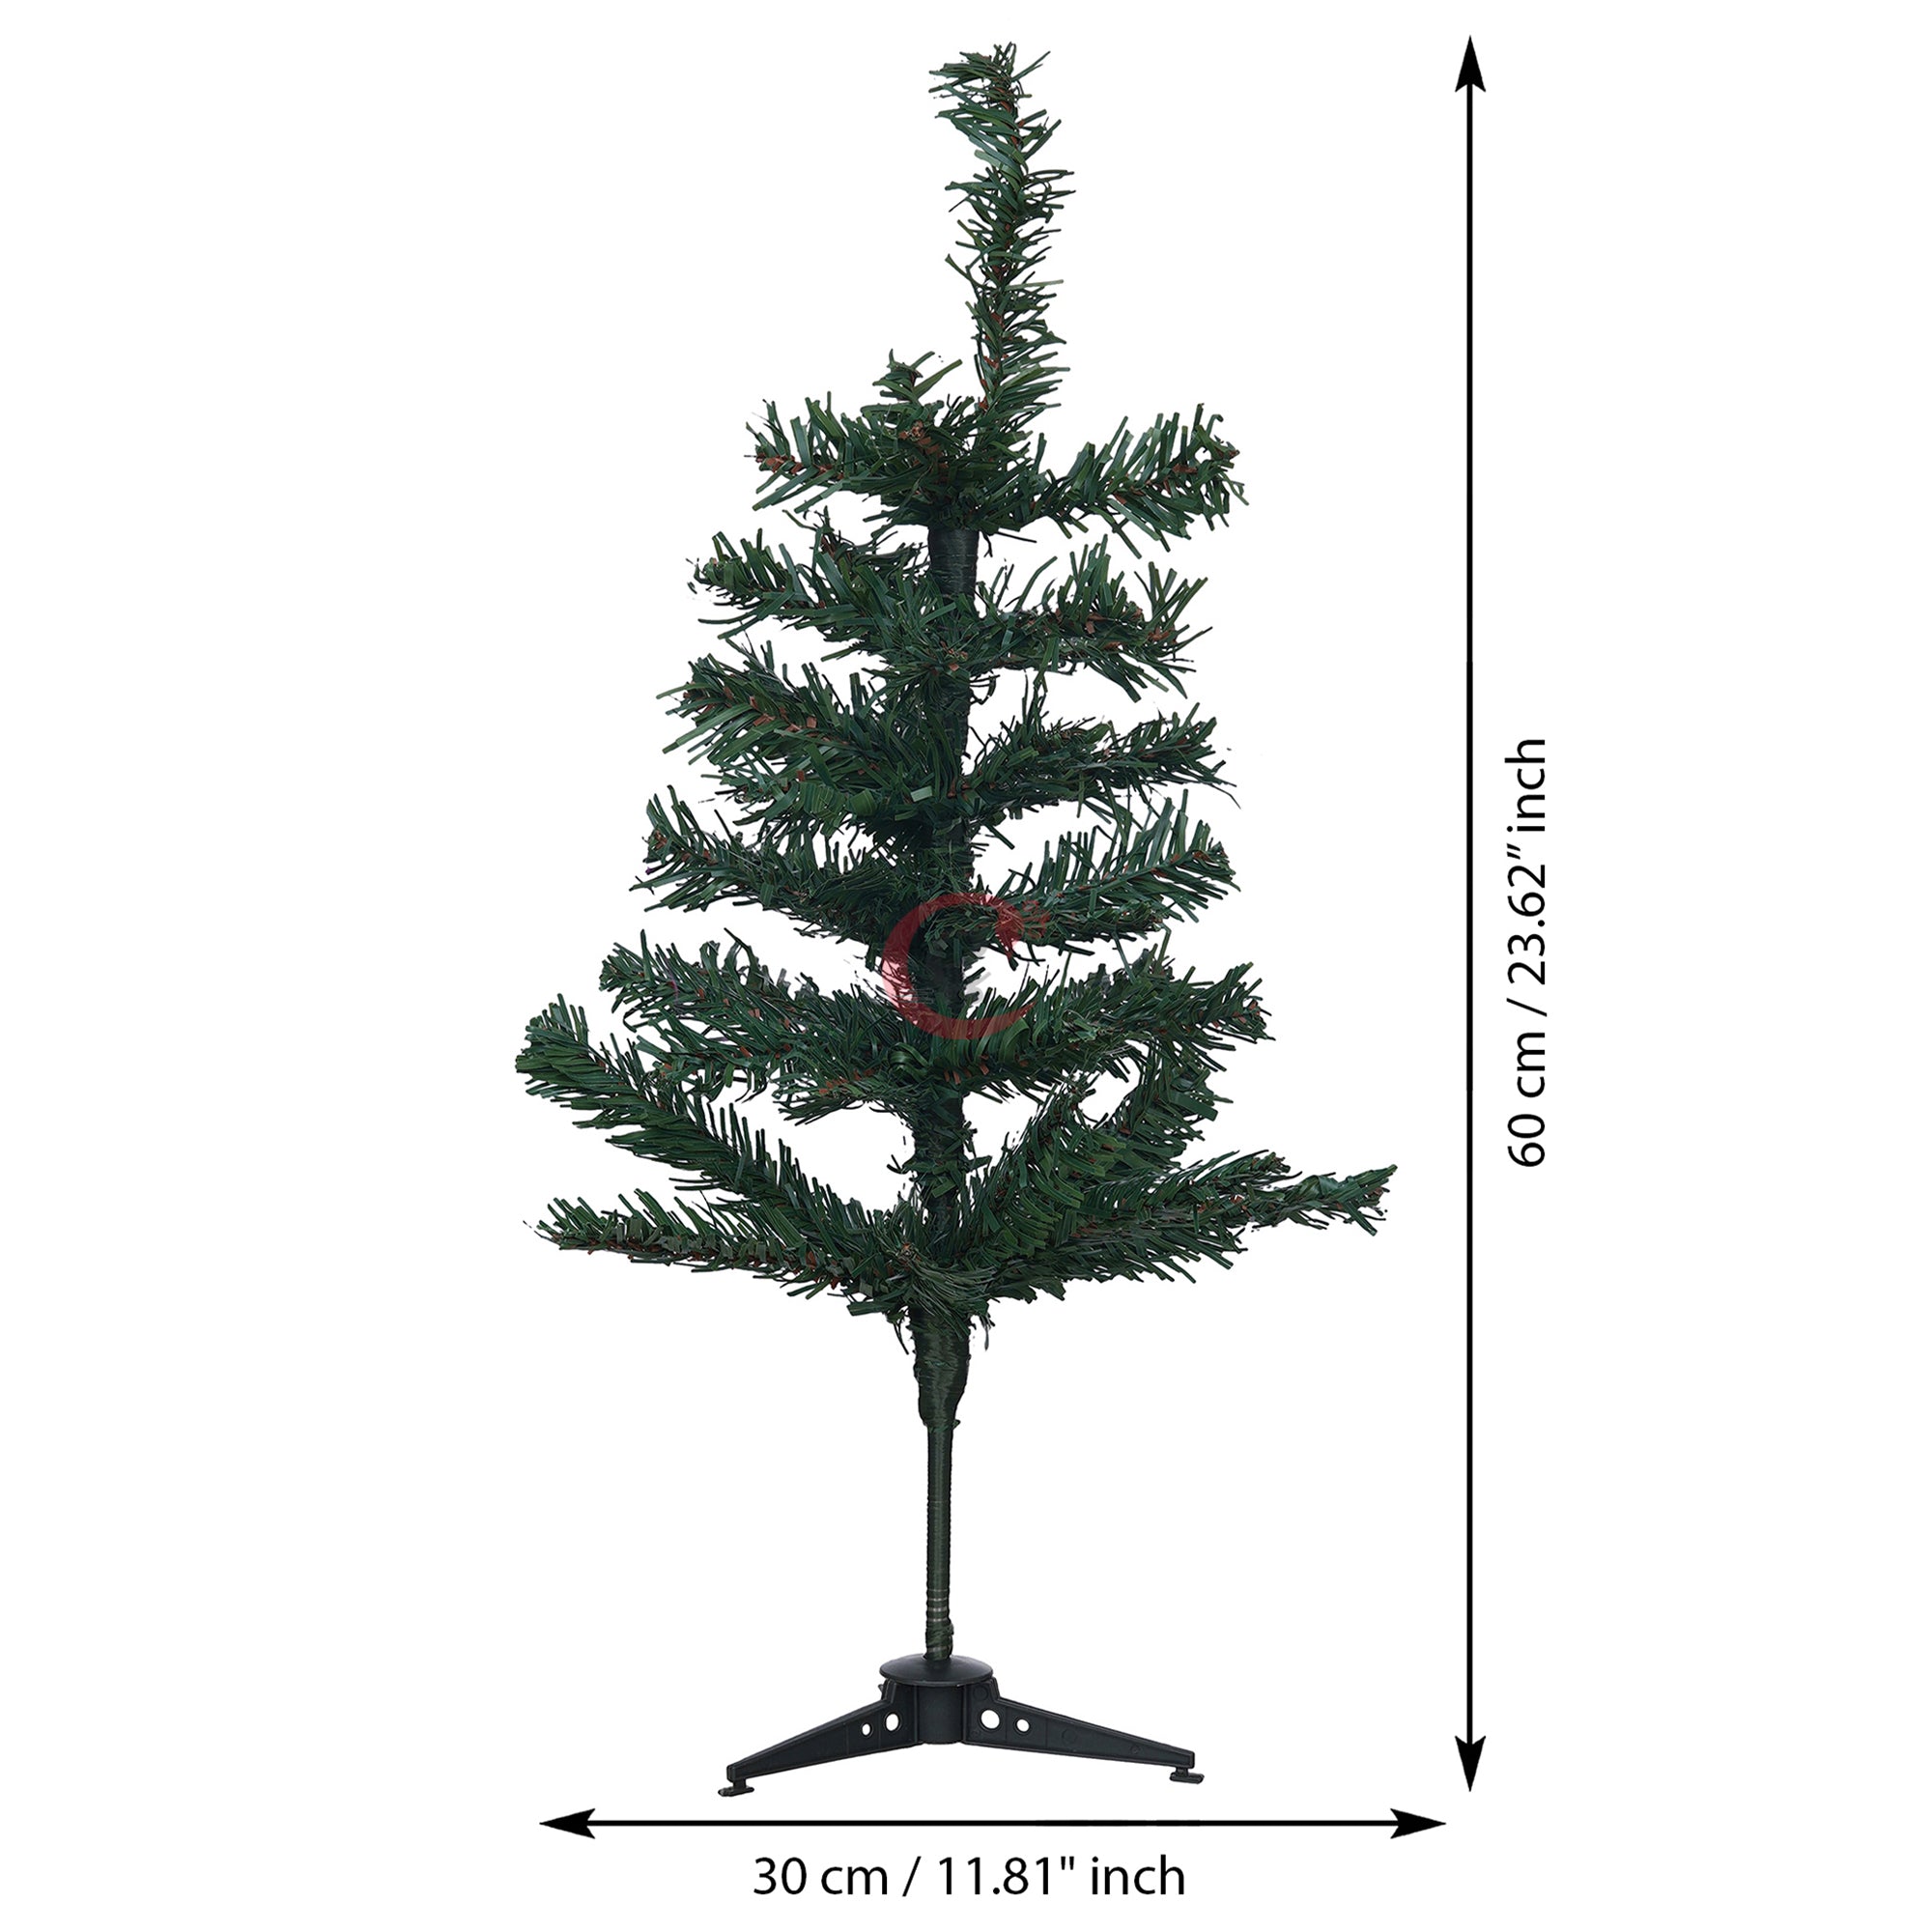 eCraftIndia 2 Feet Green Artificial Christmas Tree Xmas Pine Tree with Metal Stand - Xmas Tree for Indoor, Outdoor, Home, Living Room, Office, Church Decor - Merry Christmas Decoration Item 2